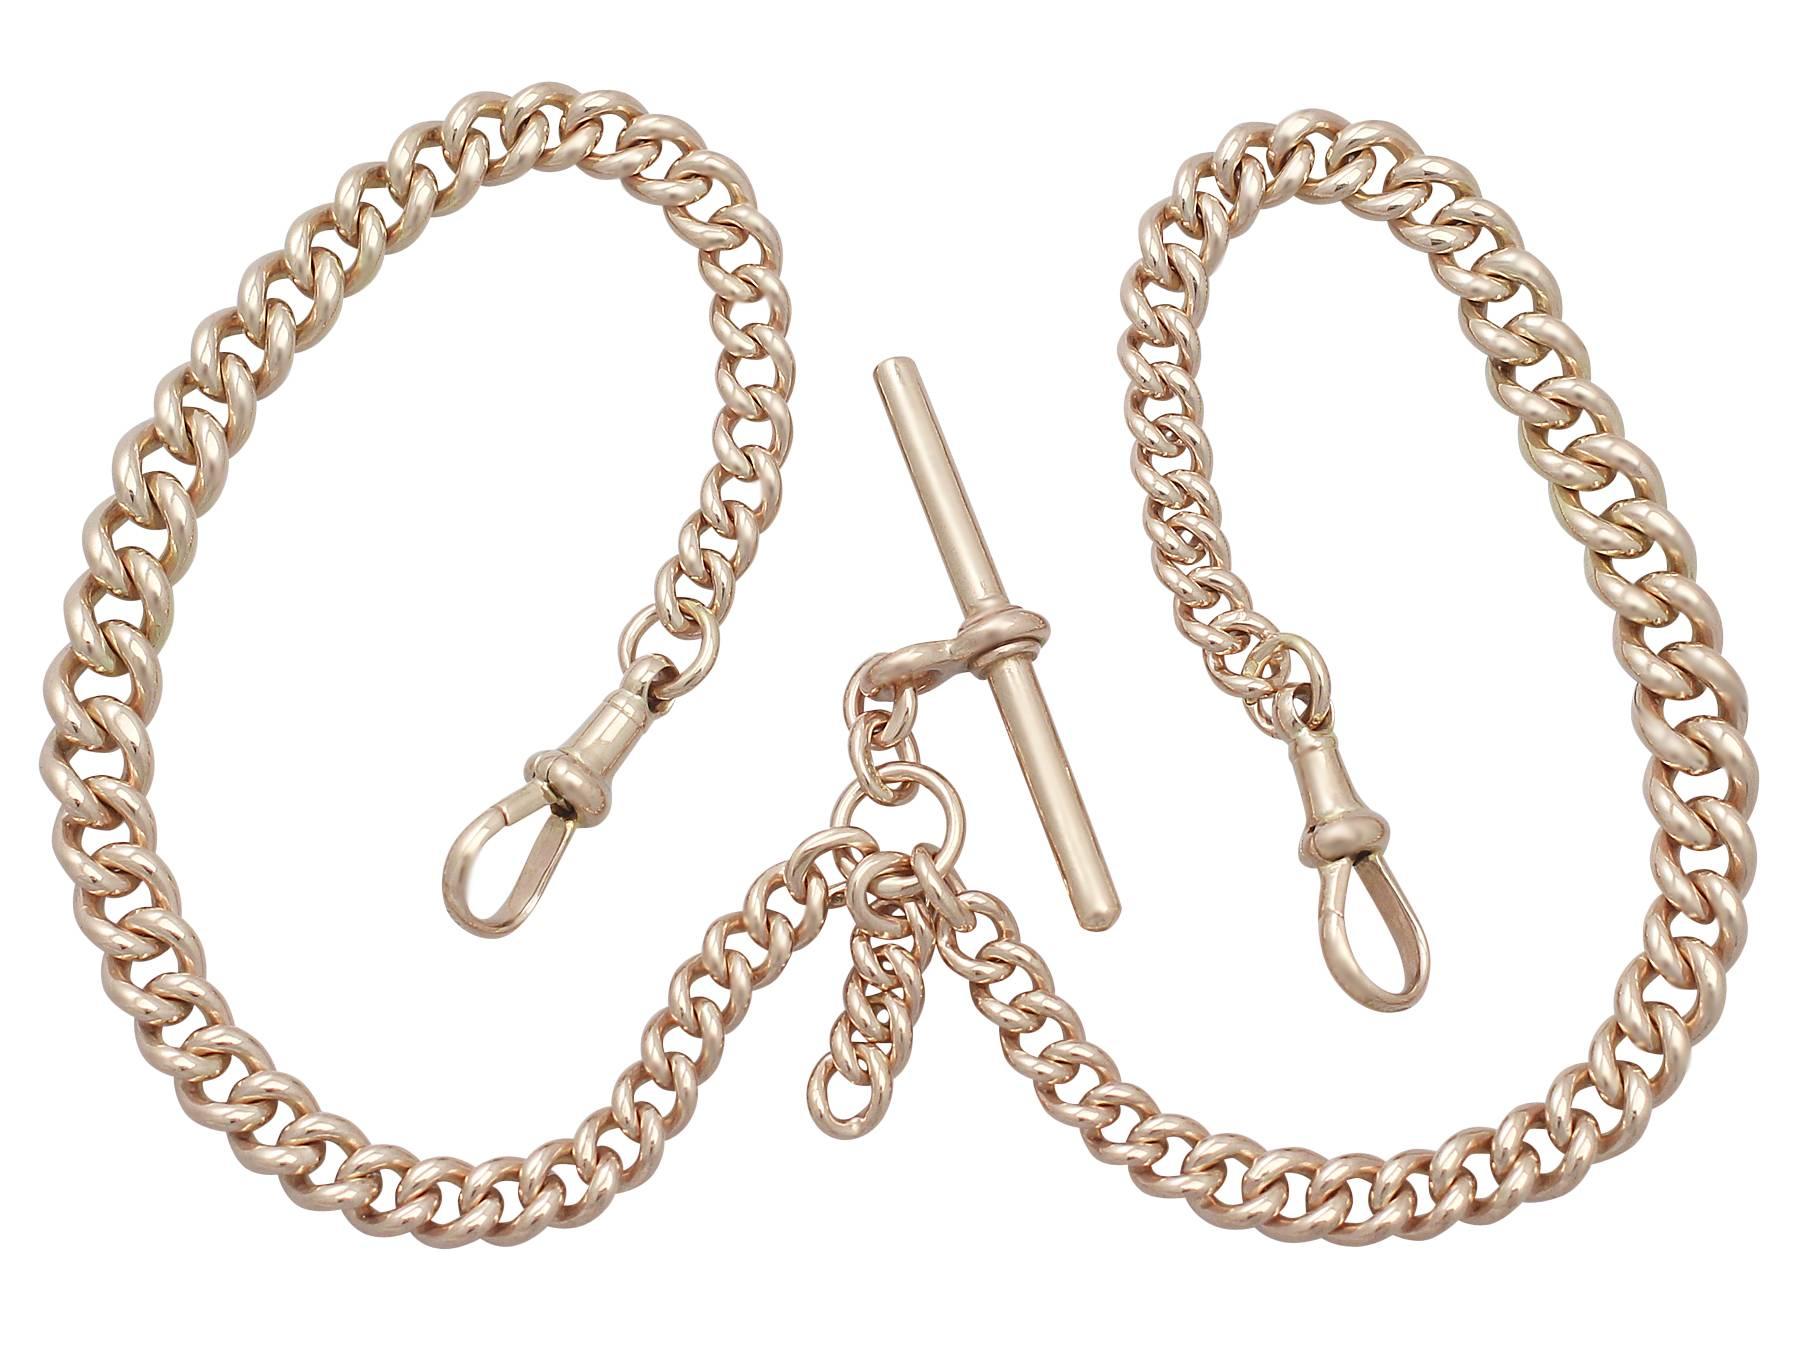 A fine and impressive antique 9 karat rose gold double Albert watch chain; part of our antique jewelry and estate jewelry collections

This impressive double Albert watch chain has been crafted in 9k rose gold.

The rounded curb links that make